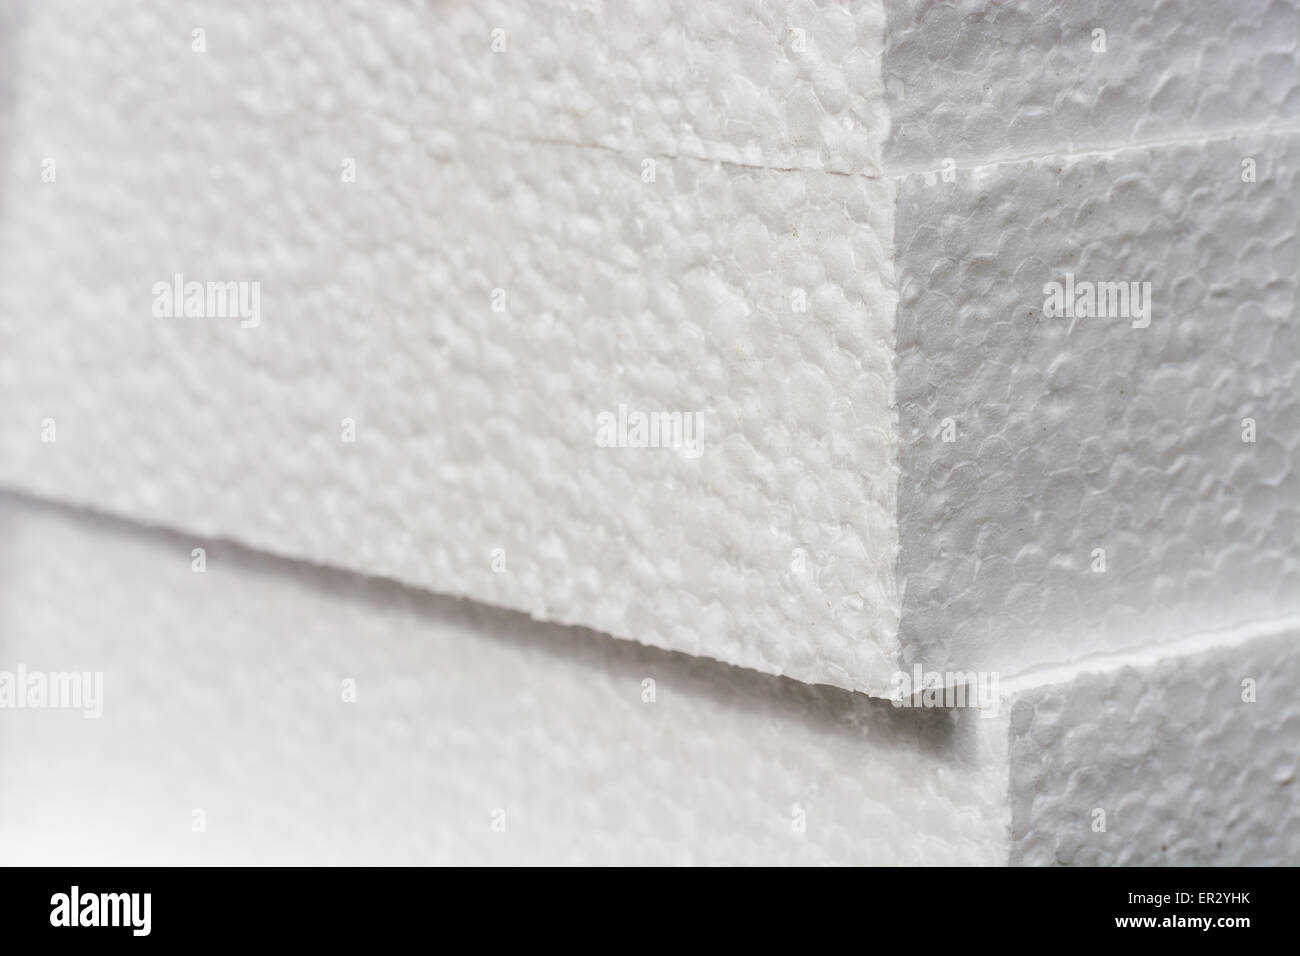 Expanded Polystyrene Insulation Stock Photos Expanded